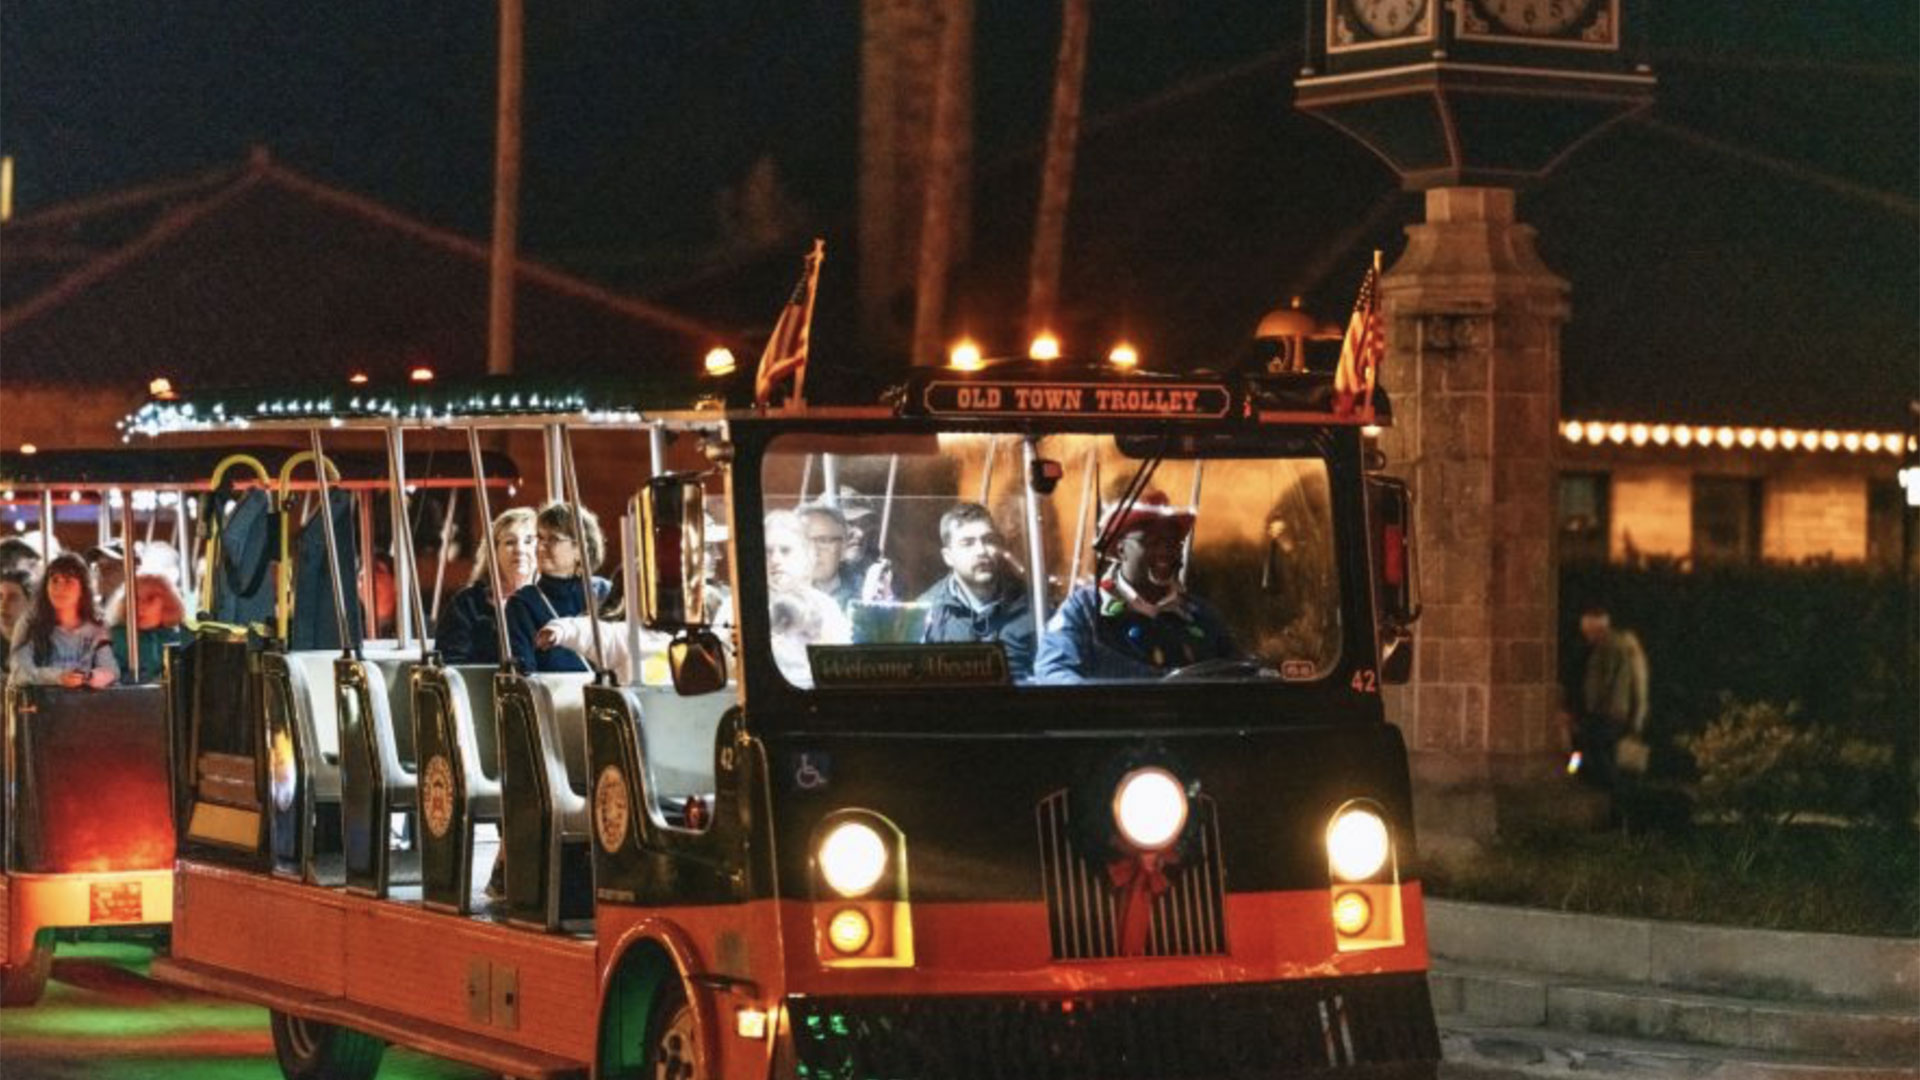 Nights of Lights Trolley Tour in St. Augustine